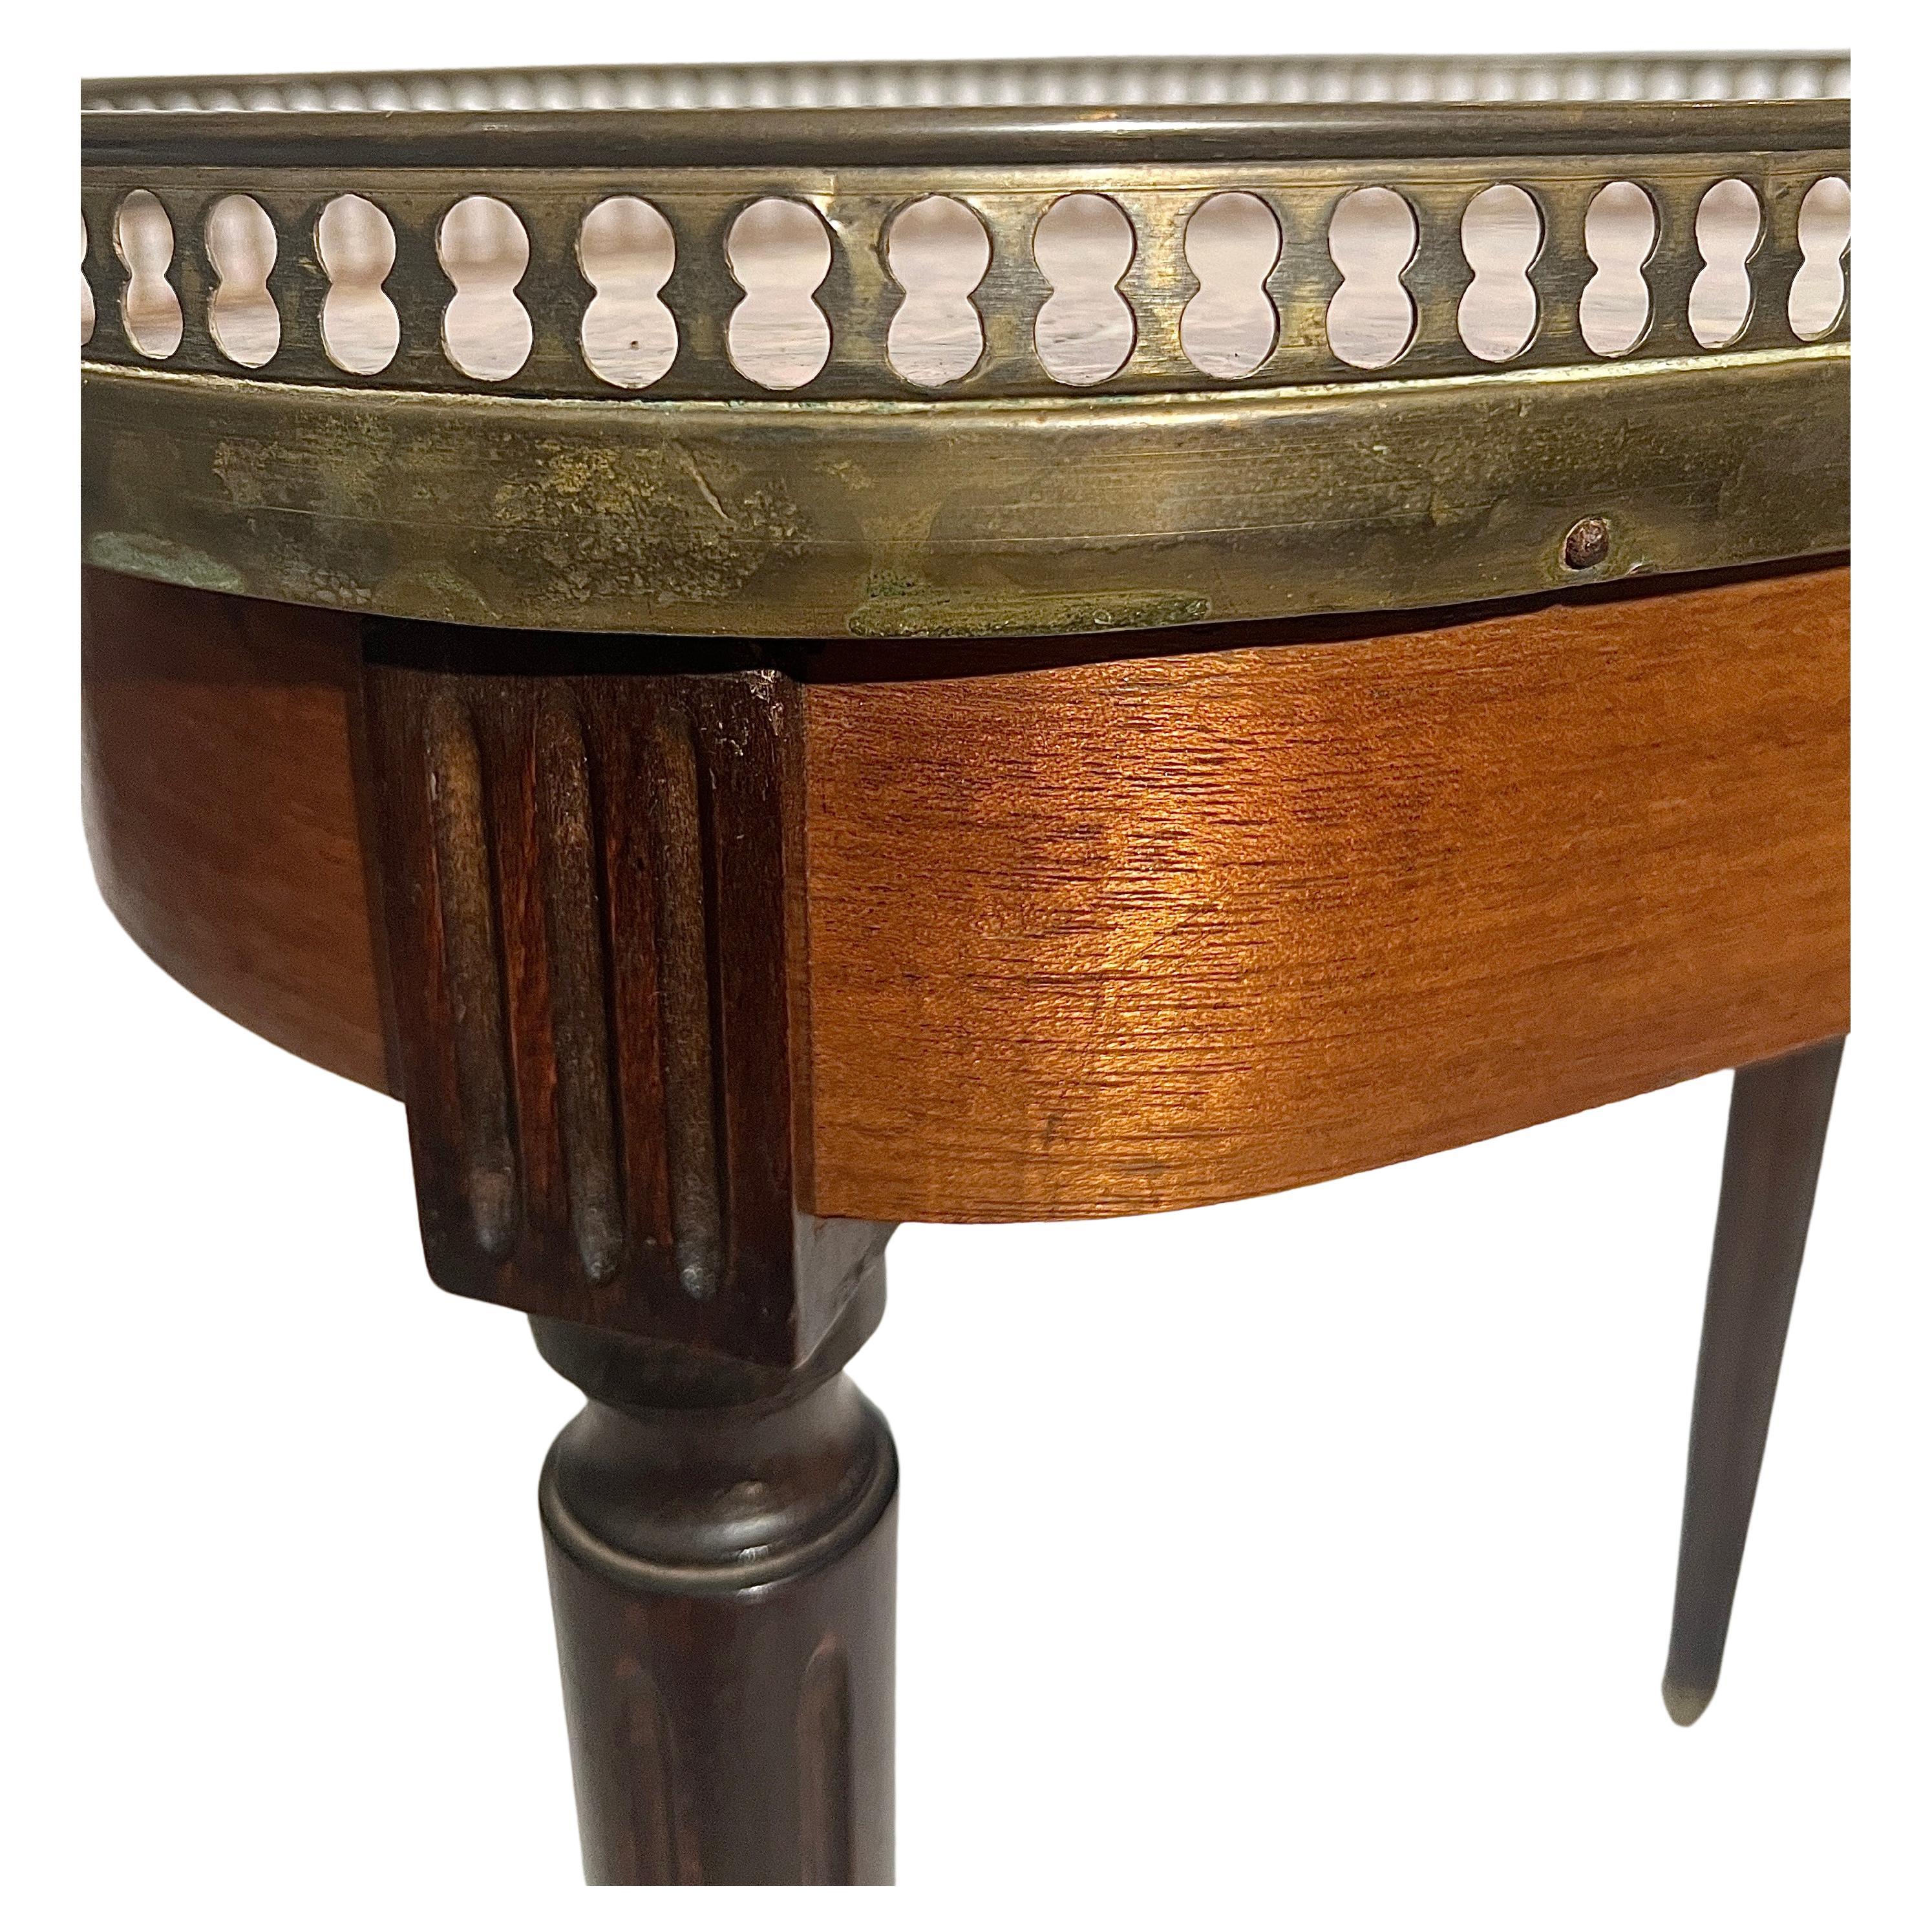 20th Century Antique French Marble Top Kidney-shaped Table, Circa 1910-1920. For Sale